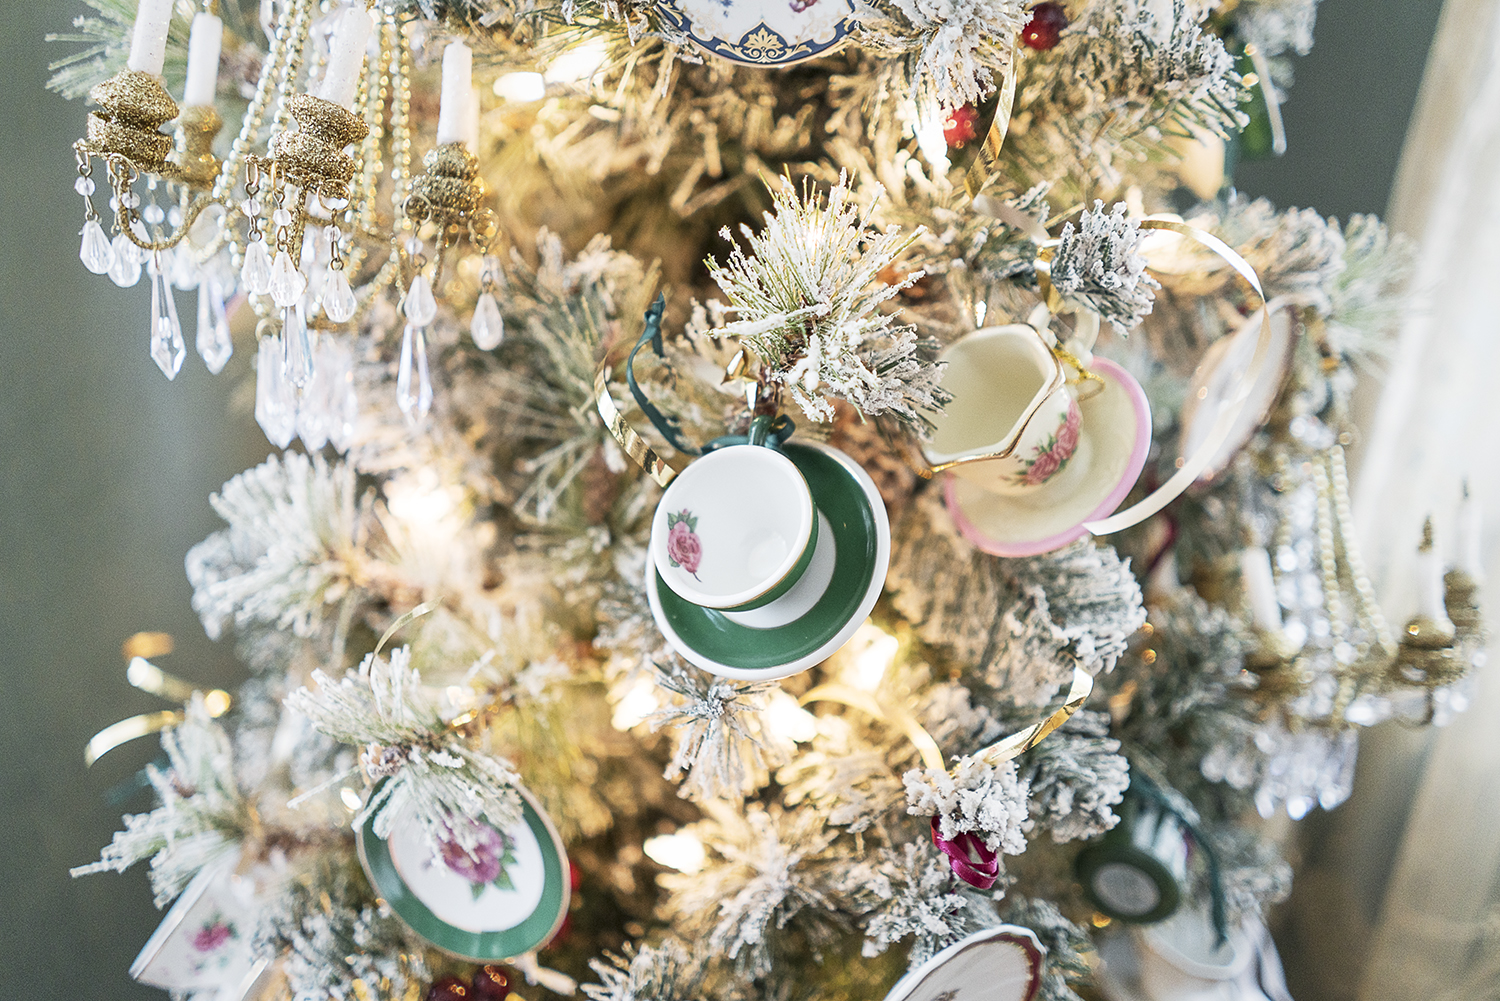 A small Christmas tree decorated with miniature tea cups and saucers sits in the corner of a room in the Heddy home.